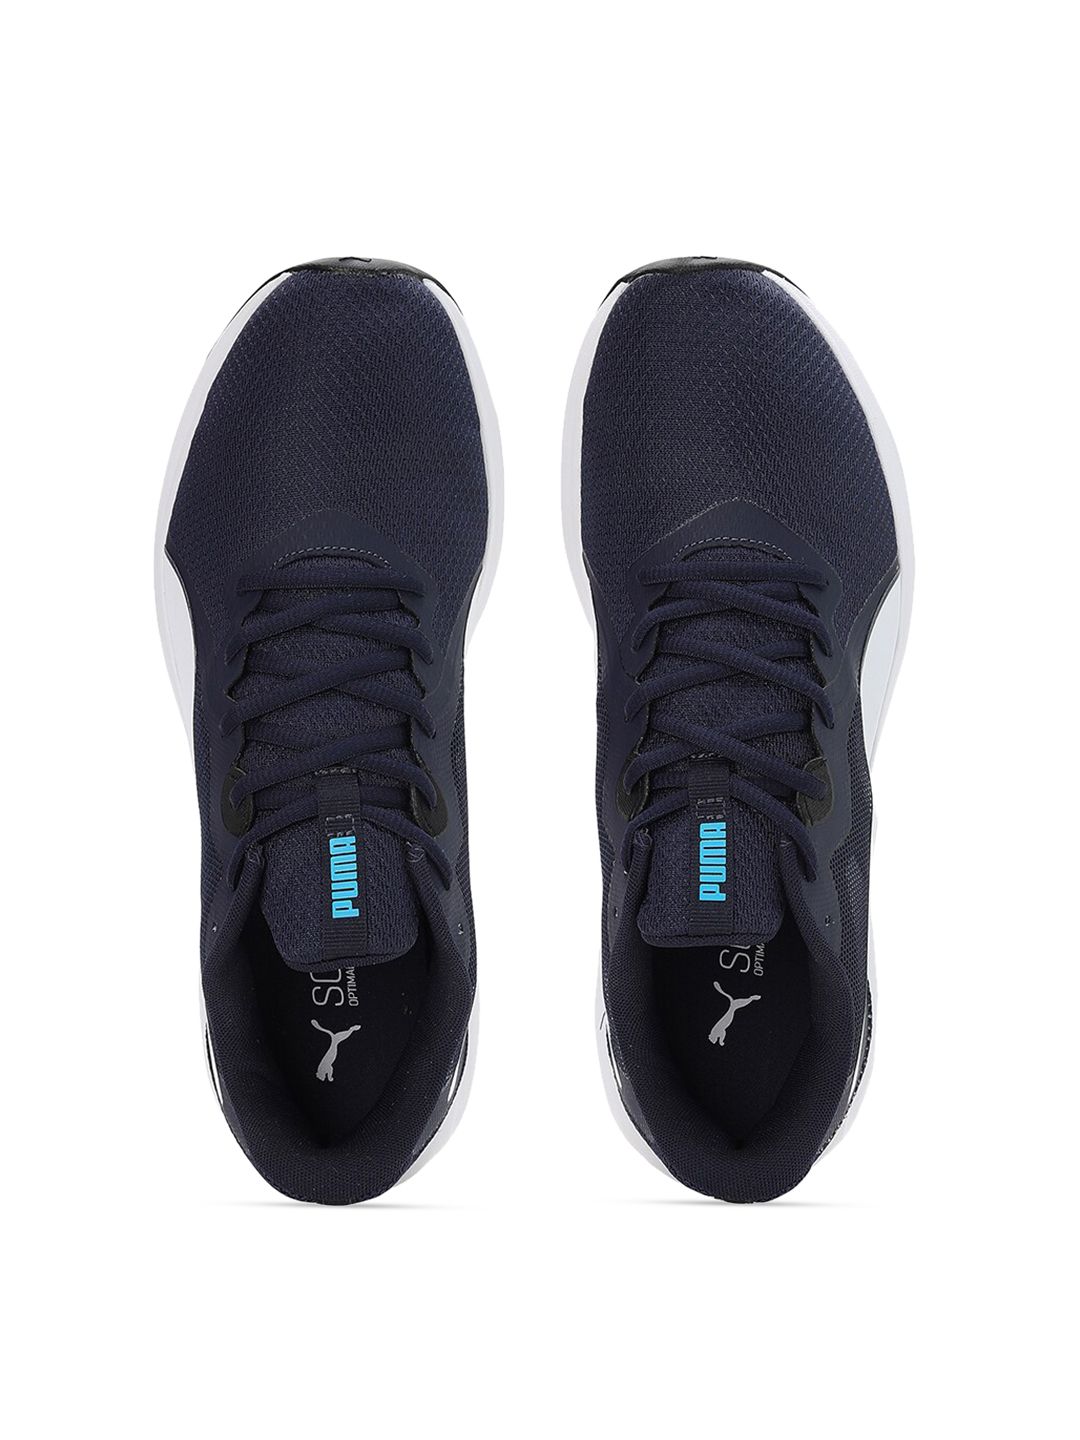 Puma Unisex Blue Sports Shoes Price in India